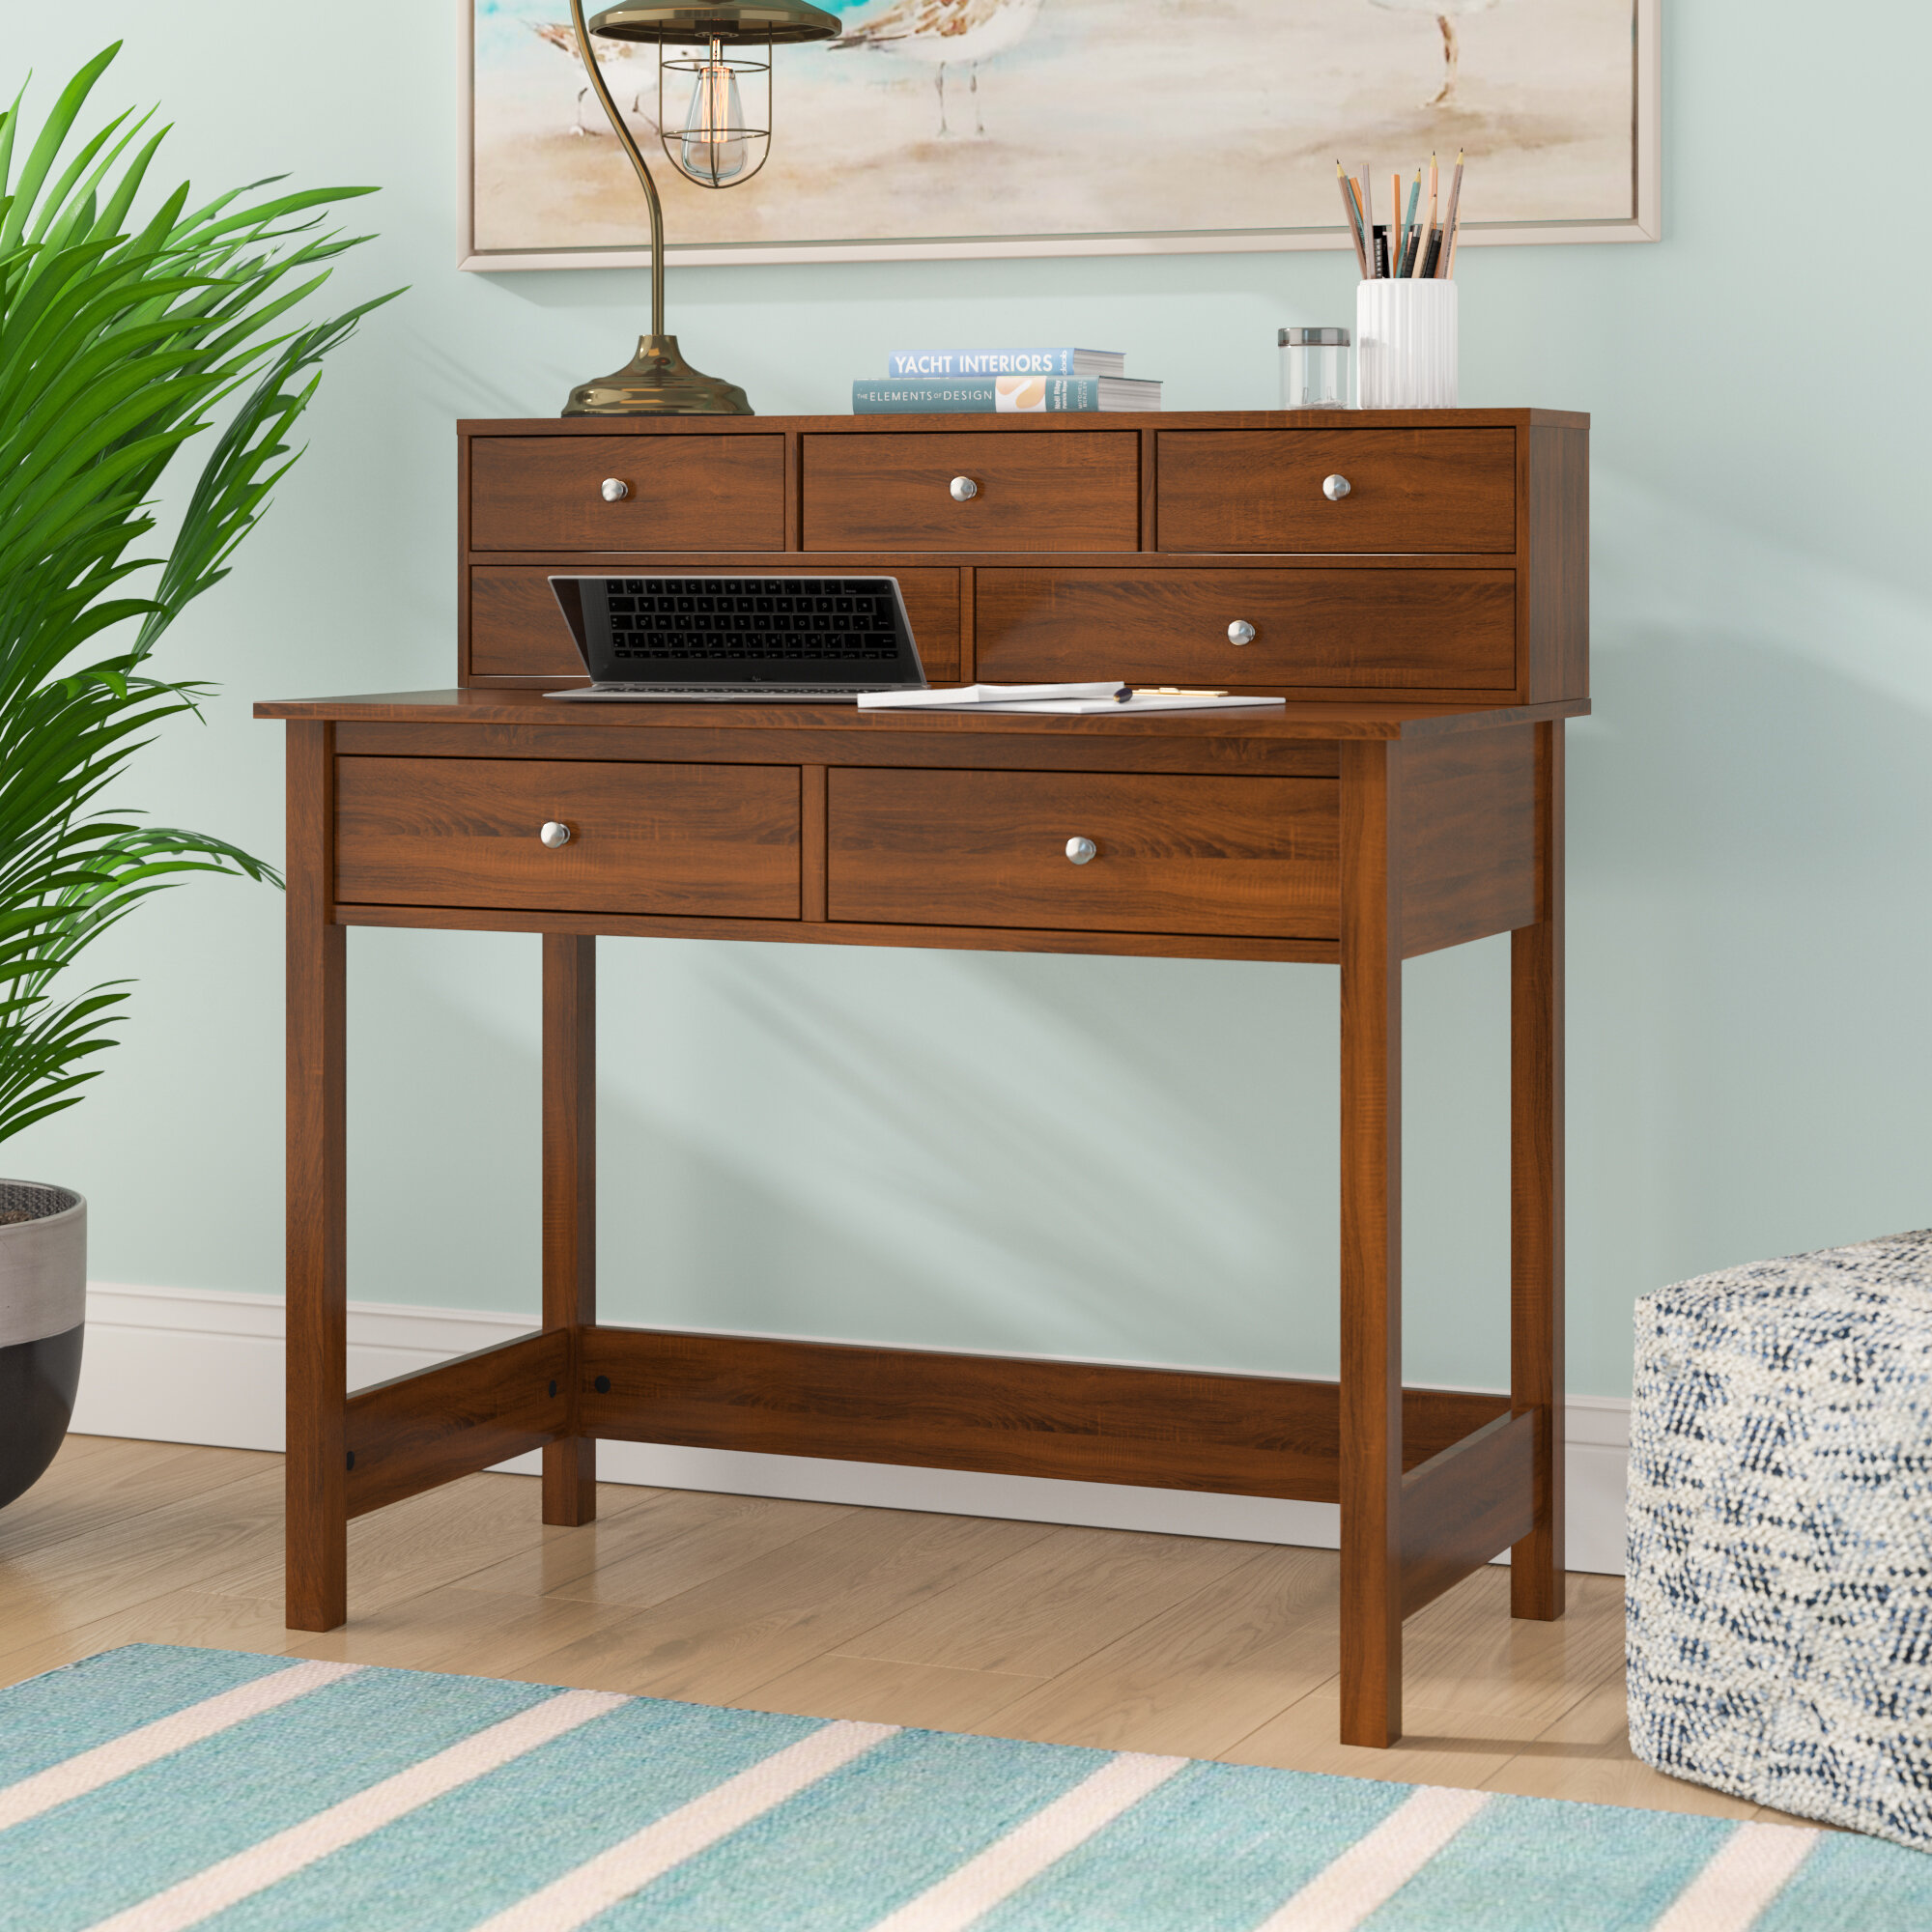 Secretary Desks Up To 80 Off This Week Only Wayfair